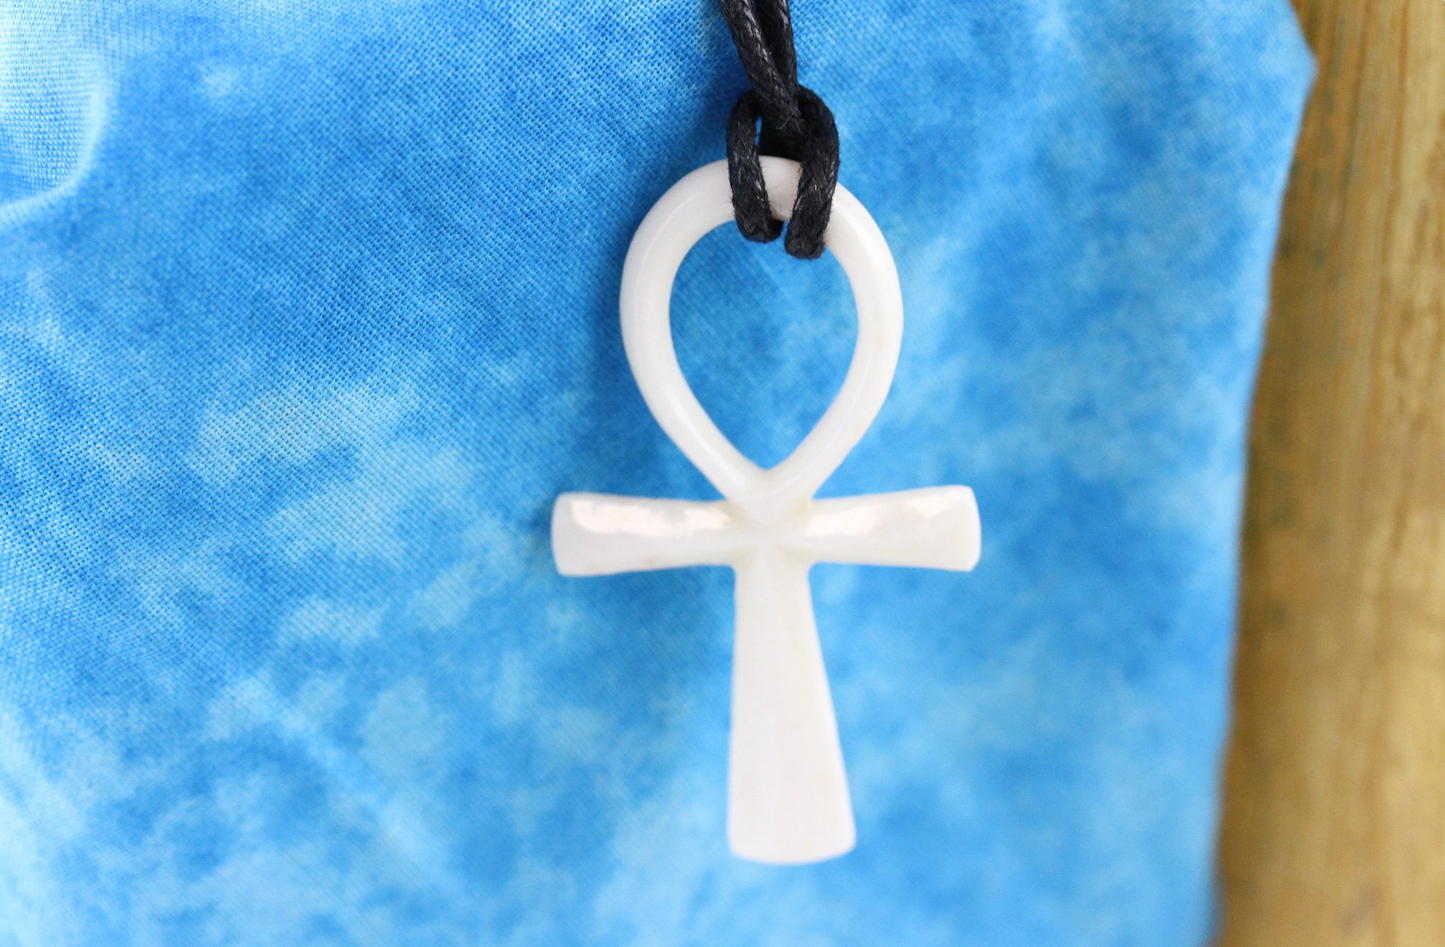 Hand Carved Ankh Necklace